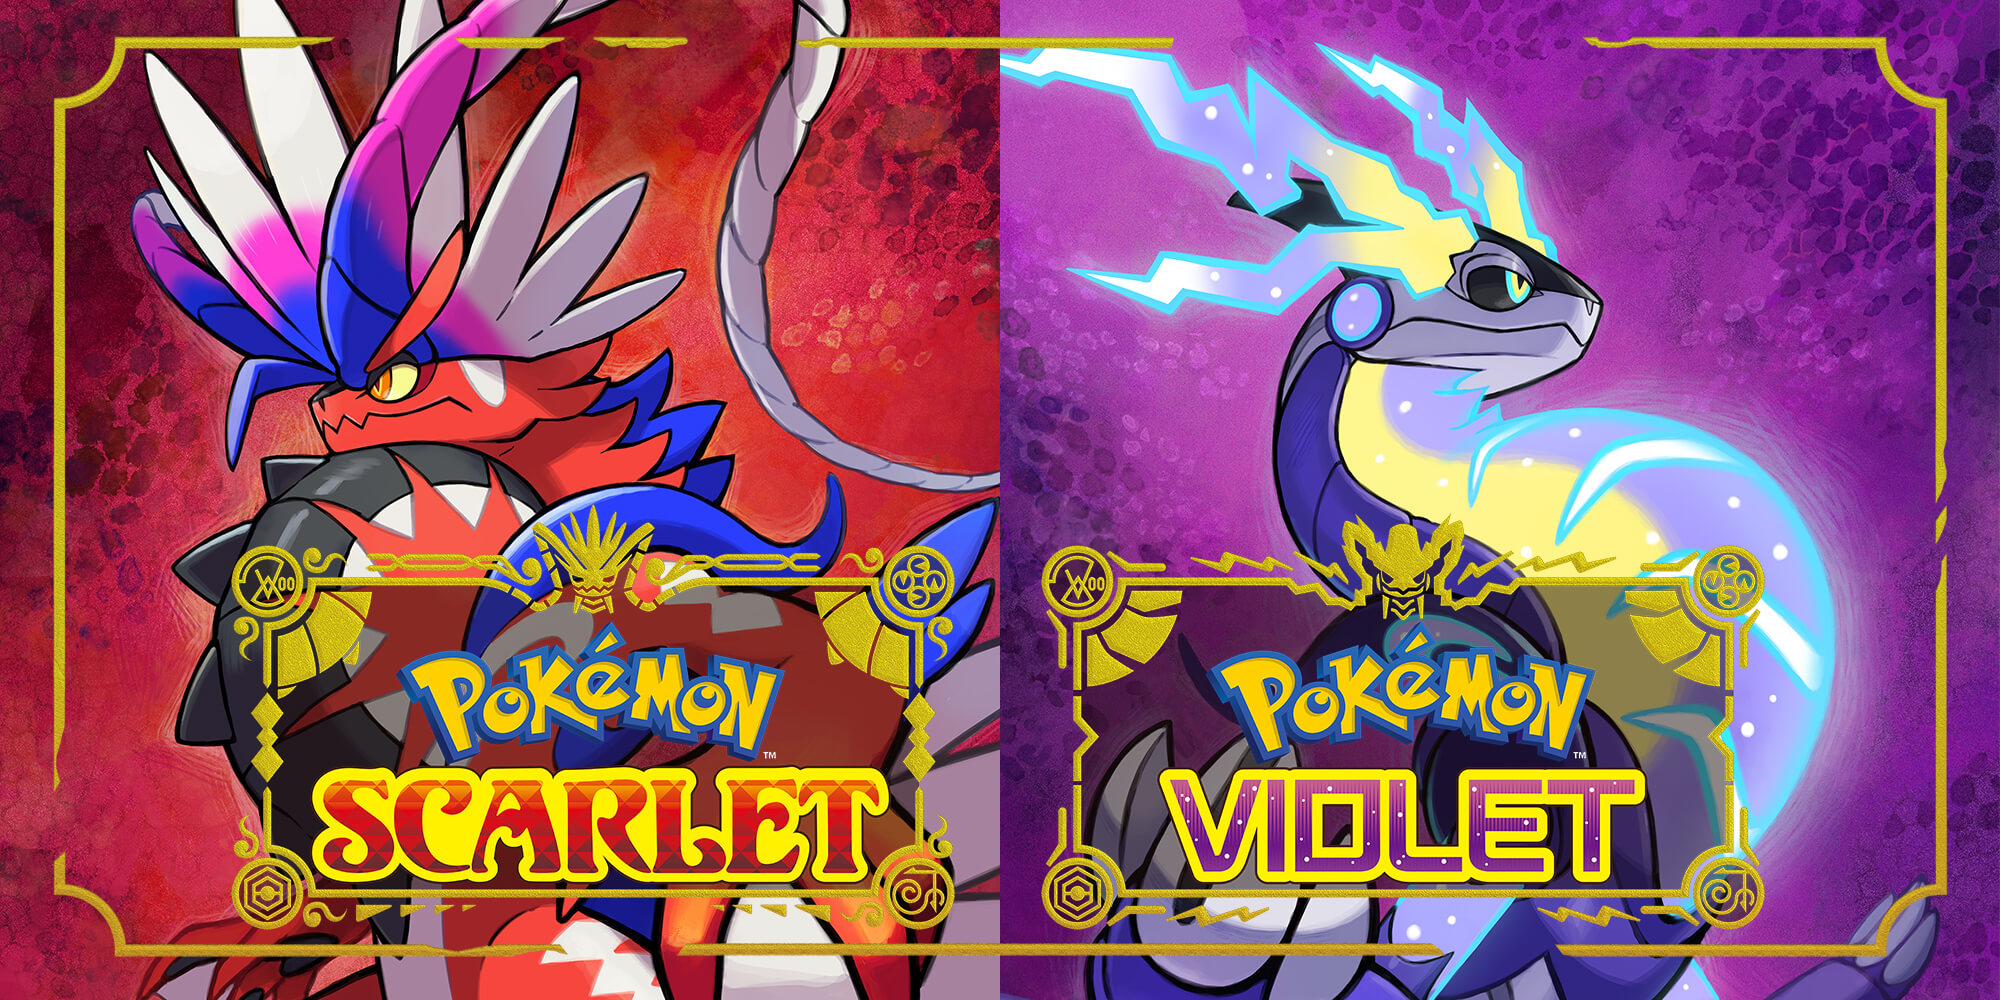 Pokemon Scarlet and Violet is already playable on PC via Nintendo